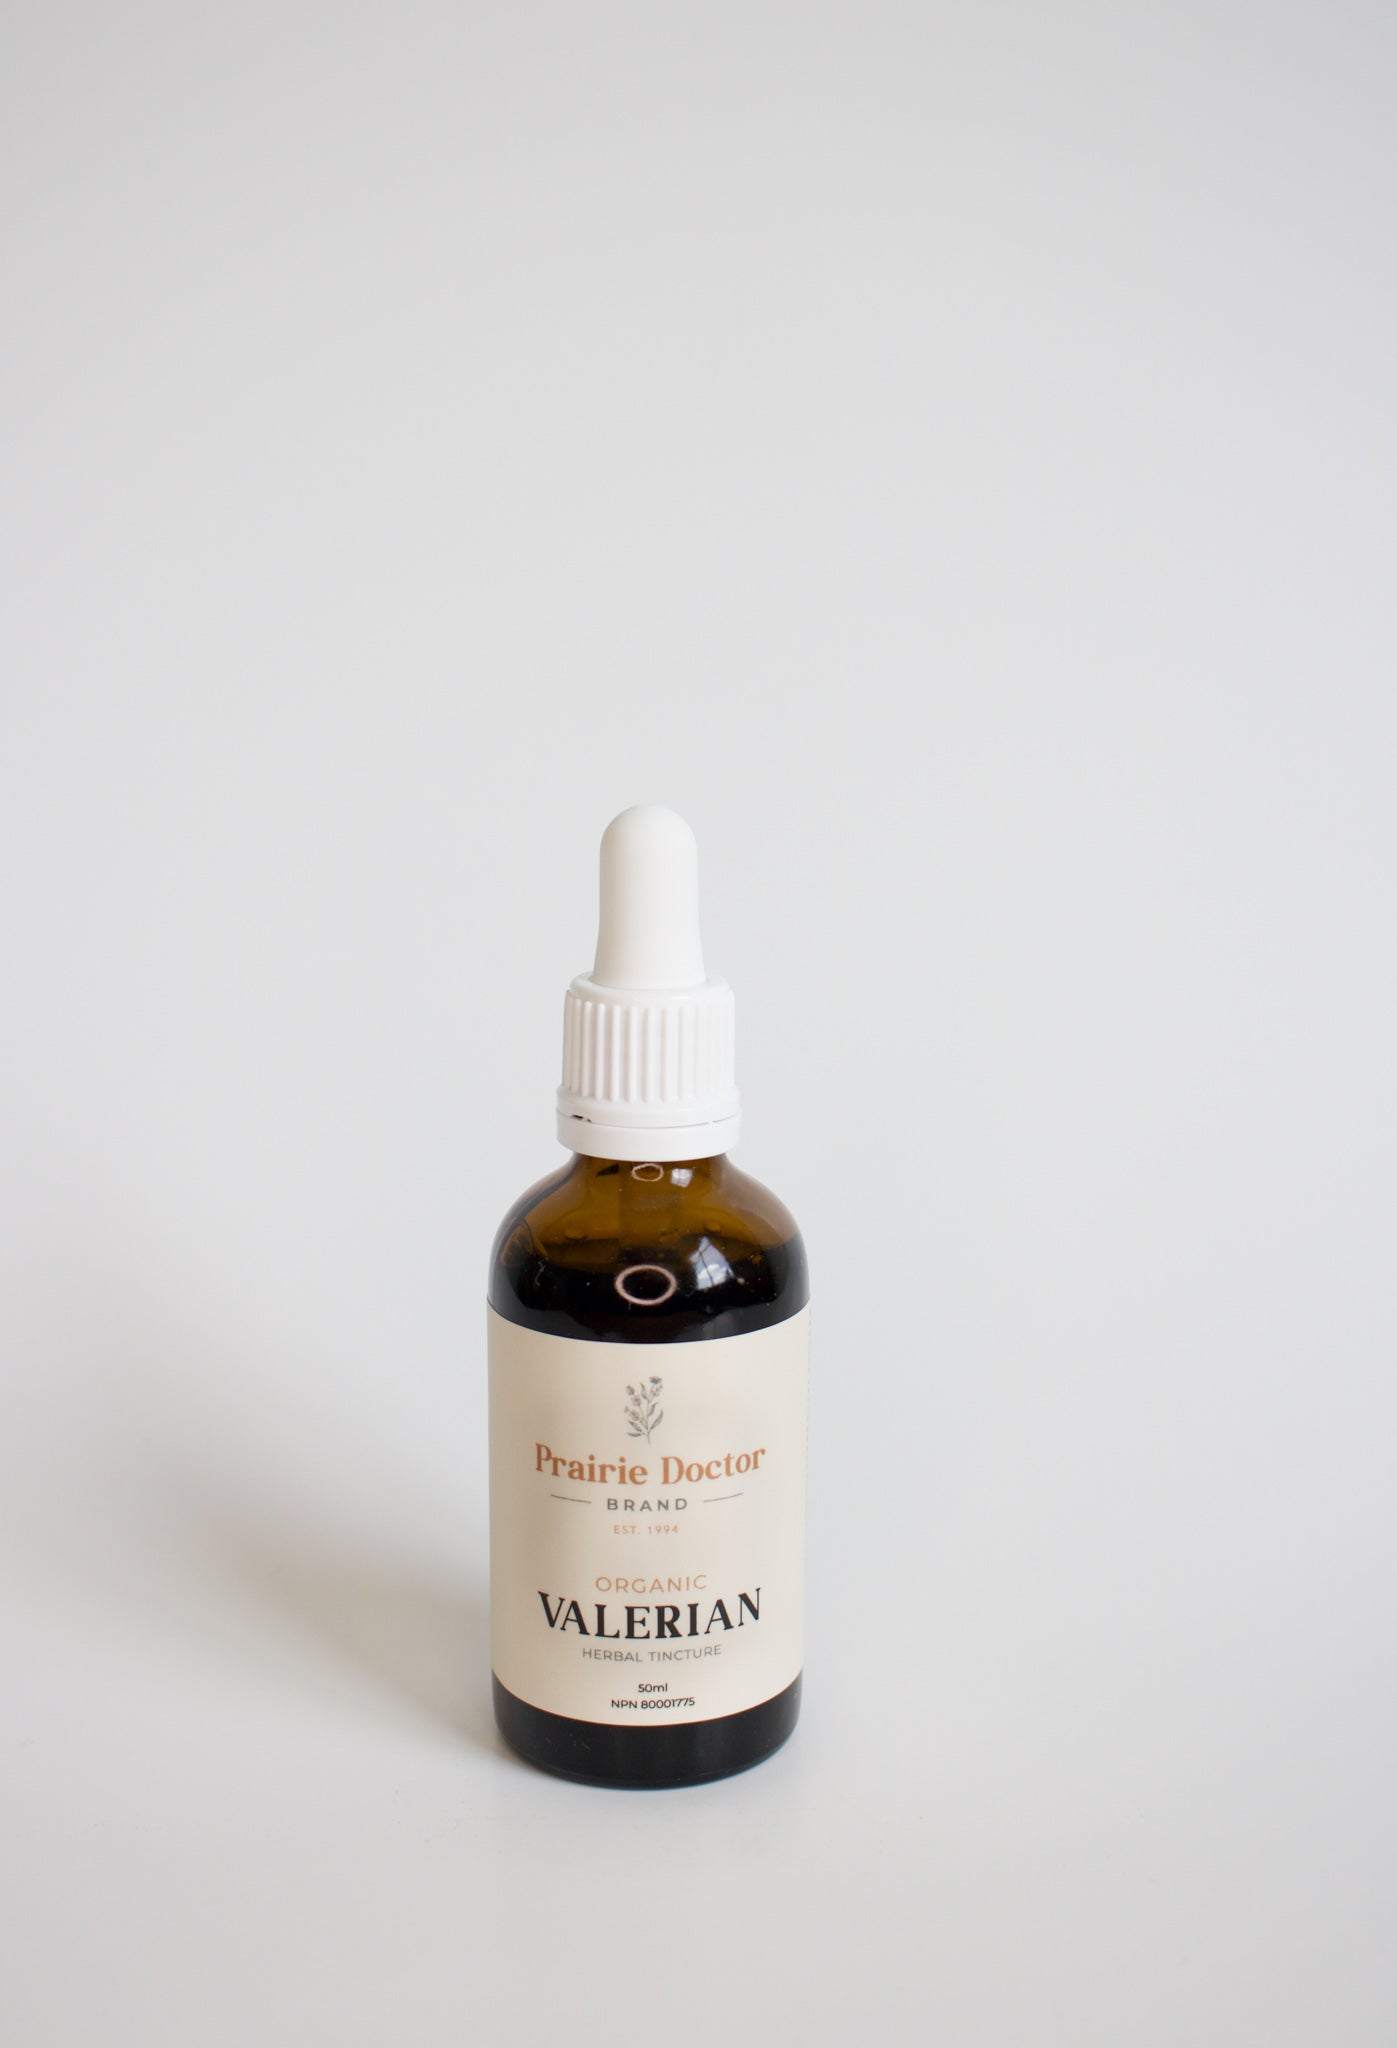 Our organic Valerian herbal tincture is crafted using organic, sustainably sourced Valerian root. Valerian is known for being a mild, natural sedative that can support better sleep as well as feelings of calmness and relaxation.